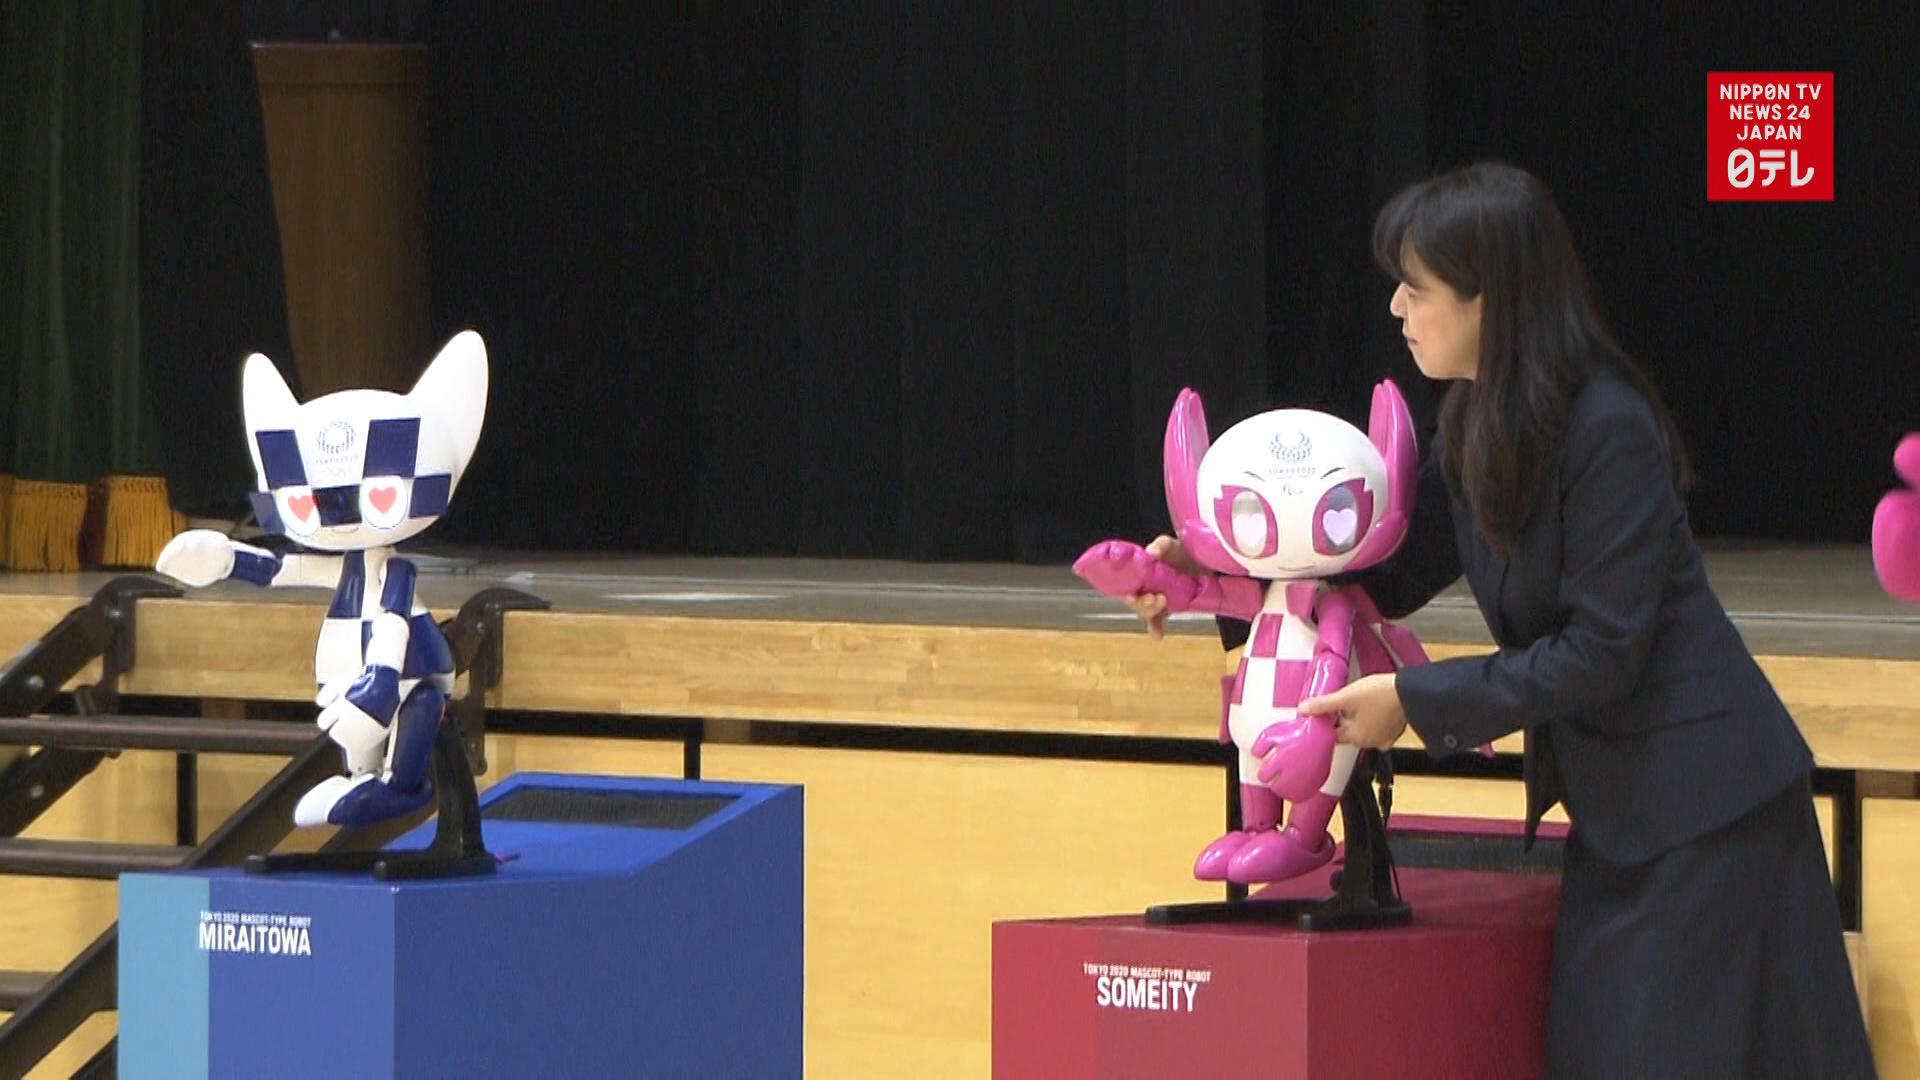 Olympic mascot robots wow students